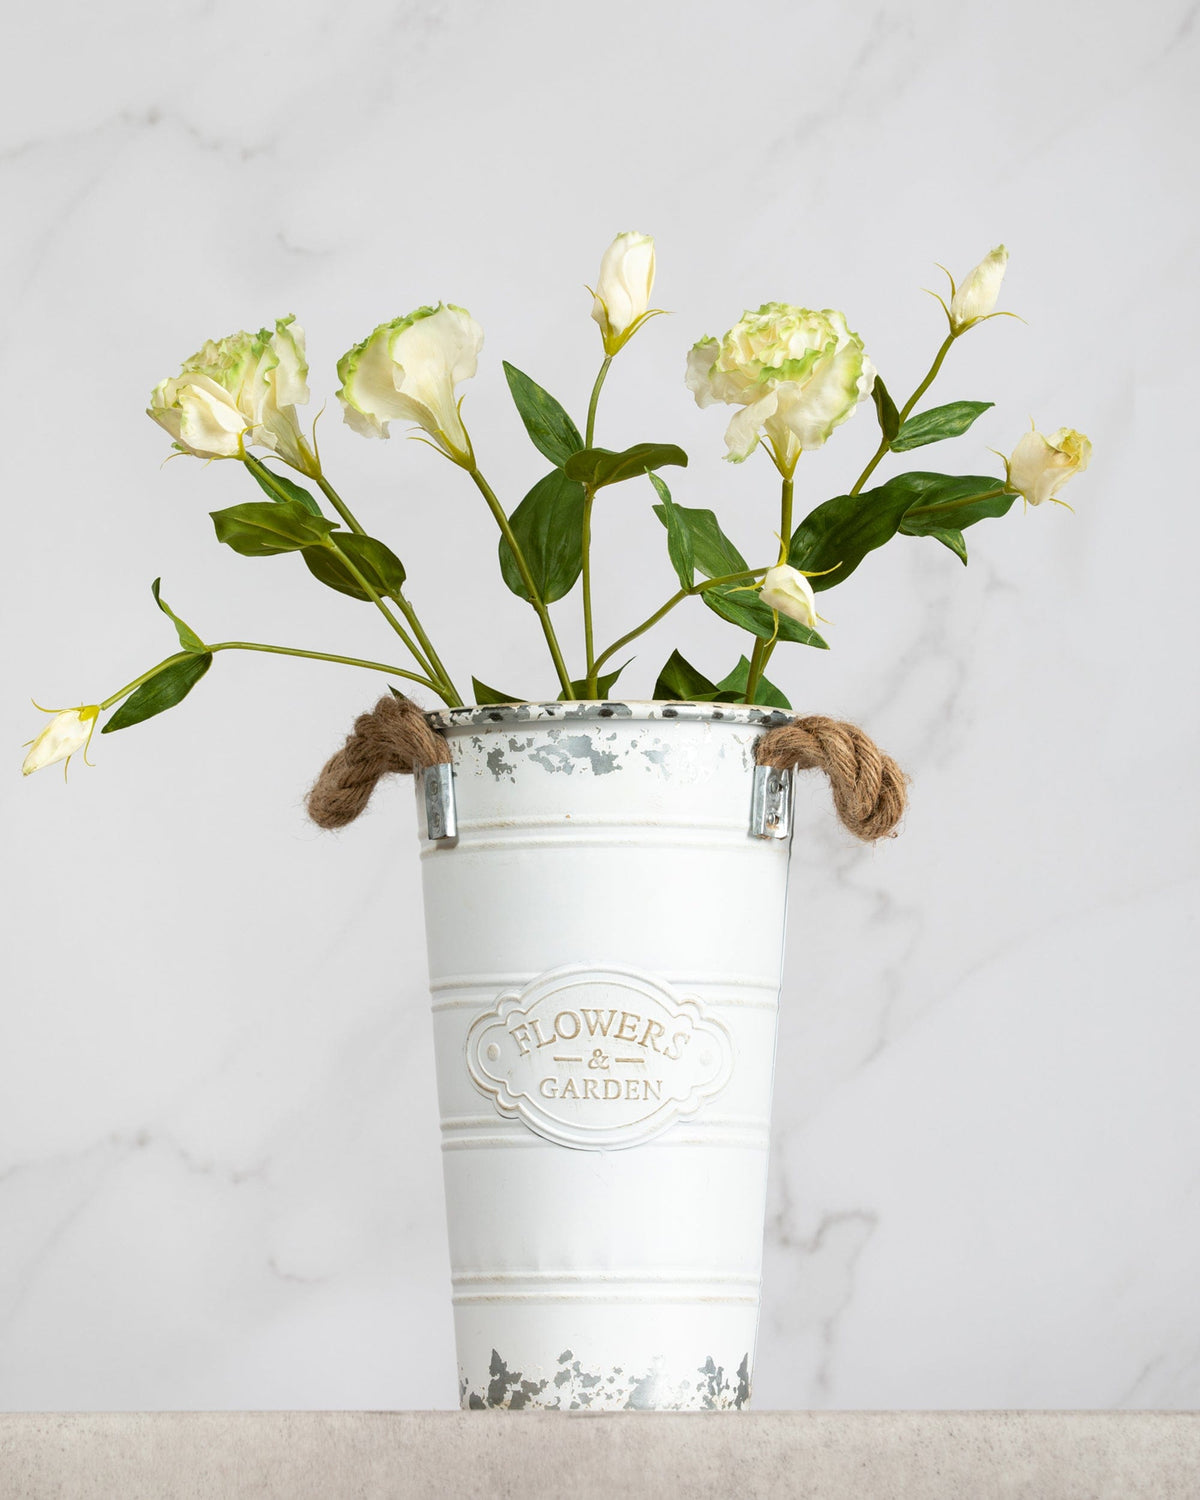 Prestige Botanicals Artificial White and Green Lisianthus stems in a white tin vase